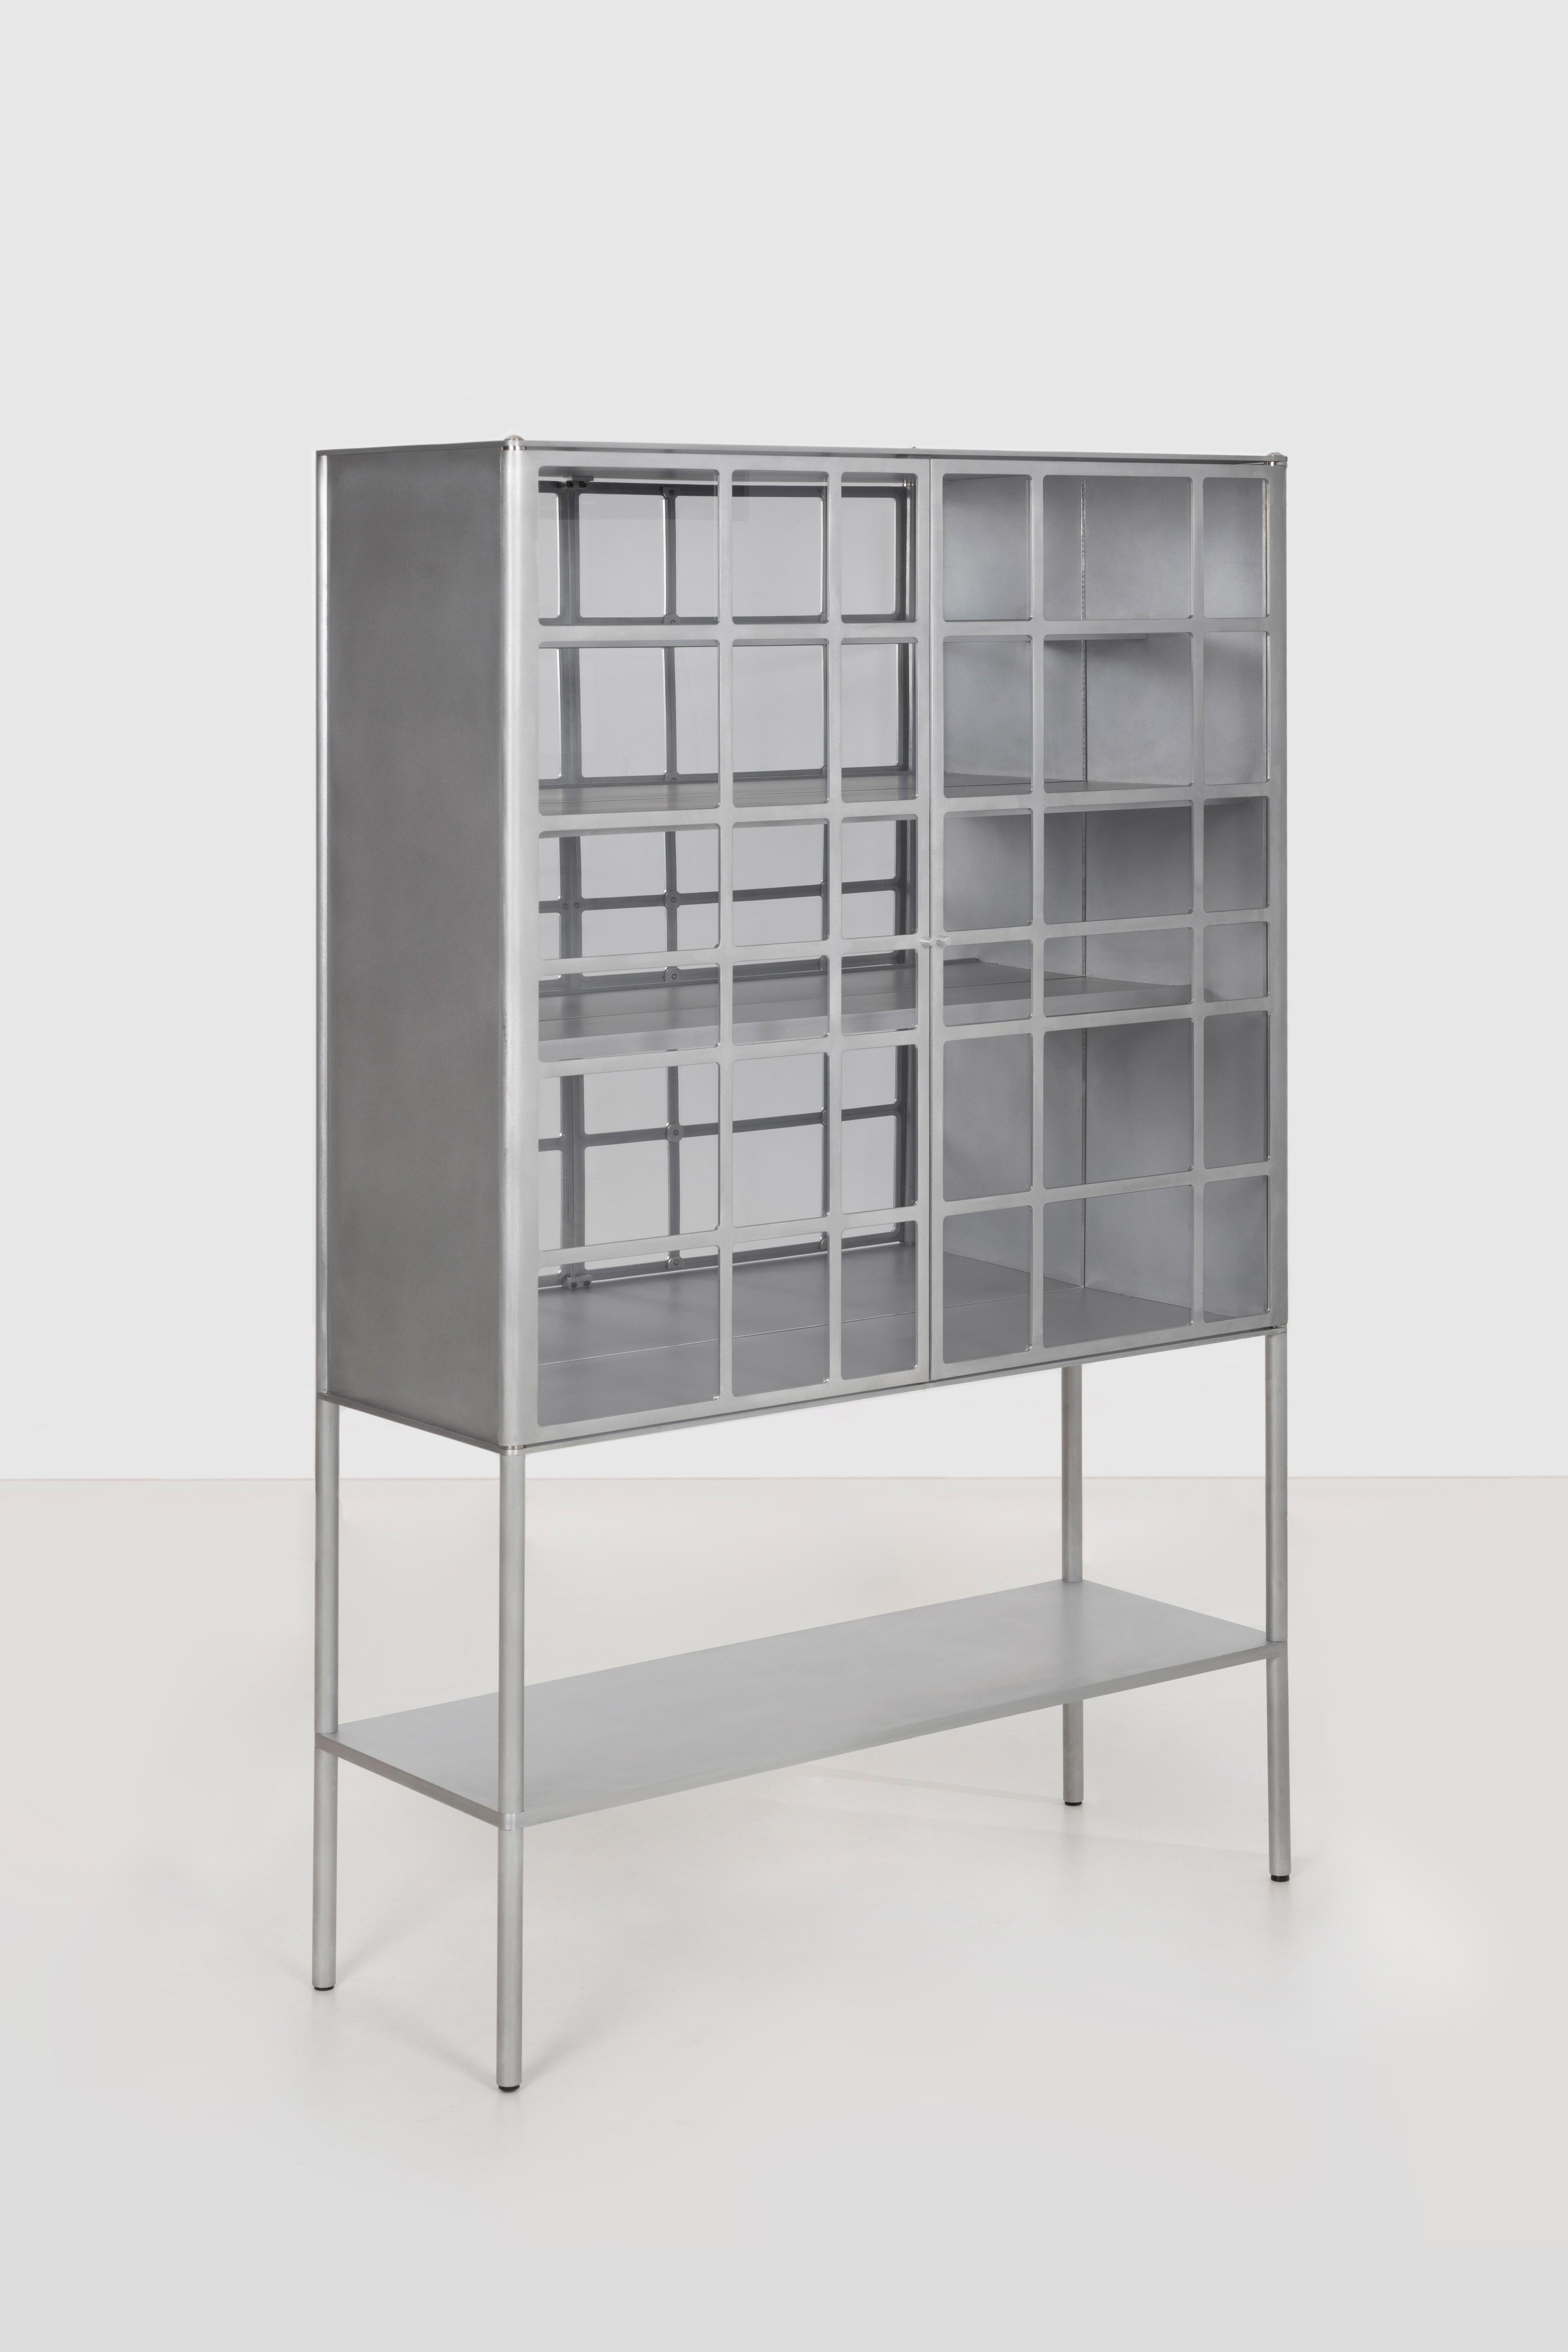 OK whiskey cabinet, in cut, milled, and machined aluminum. Milled acrylic window inserts are set from the reverse and fastened with a custom washer. Inset foot levelers are concealed within the solid aluminum leg. The lower shelf is a solid